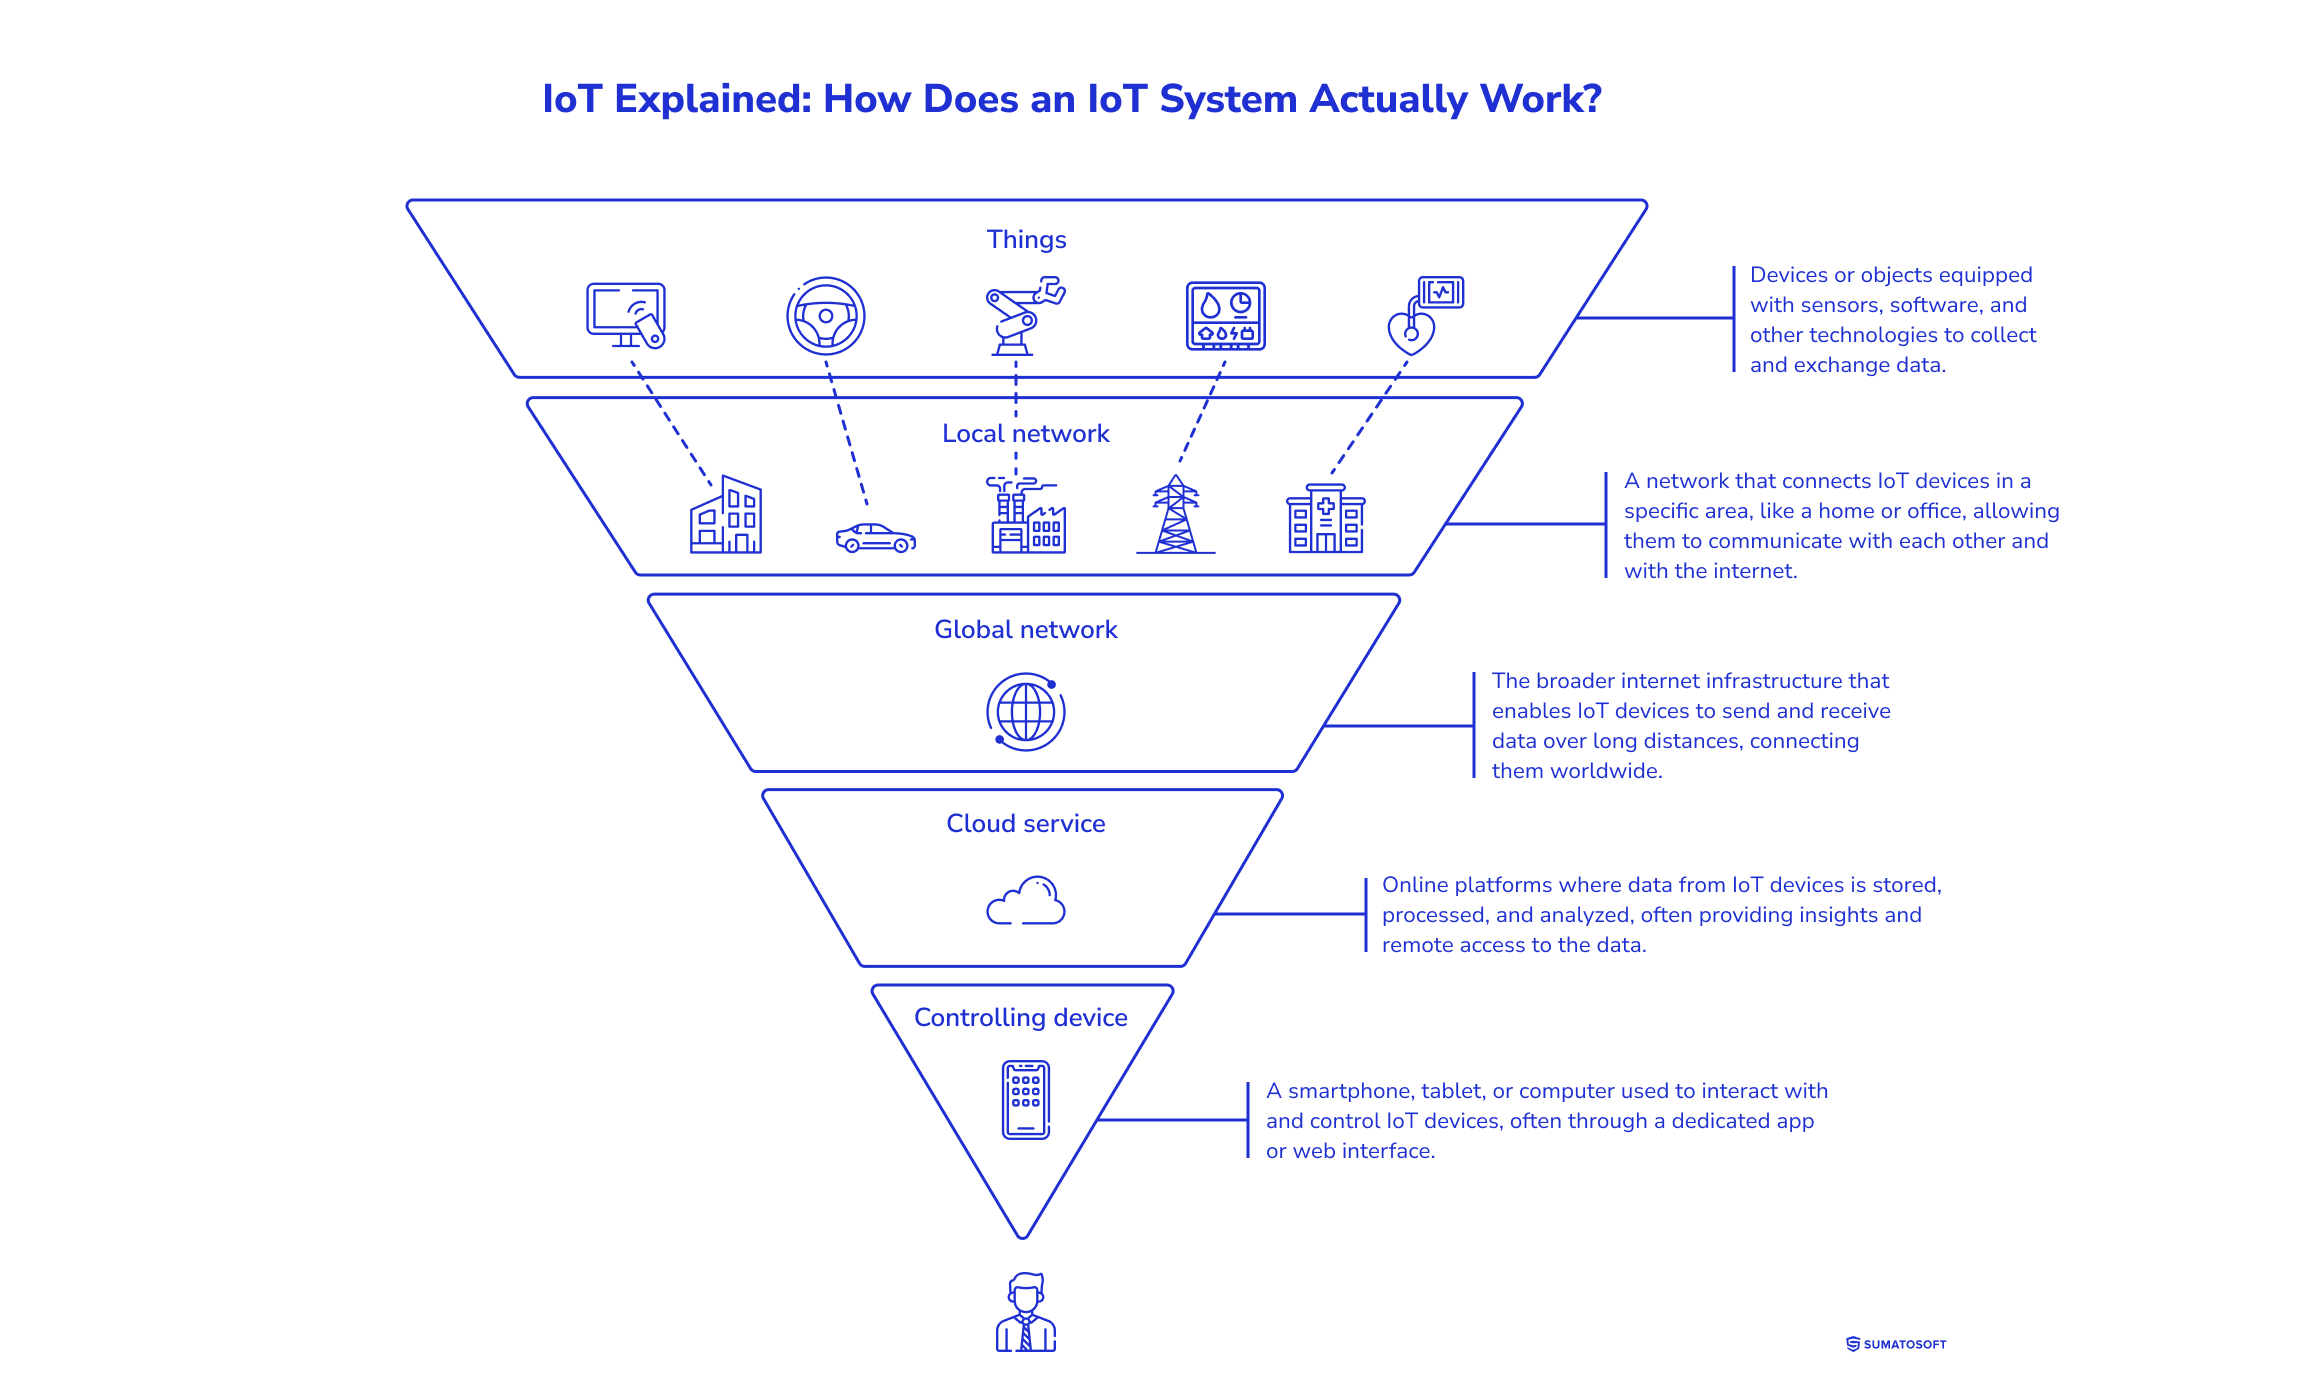 IoT Explained: How Does an IoT System Actually Work